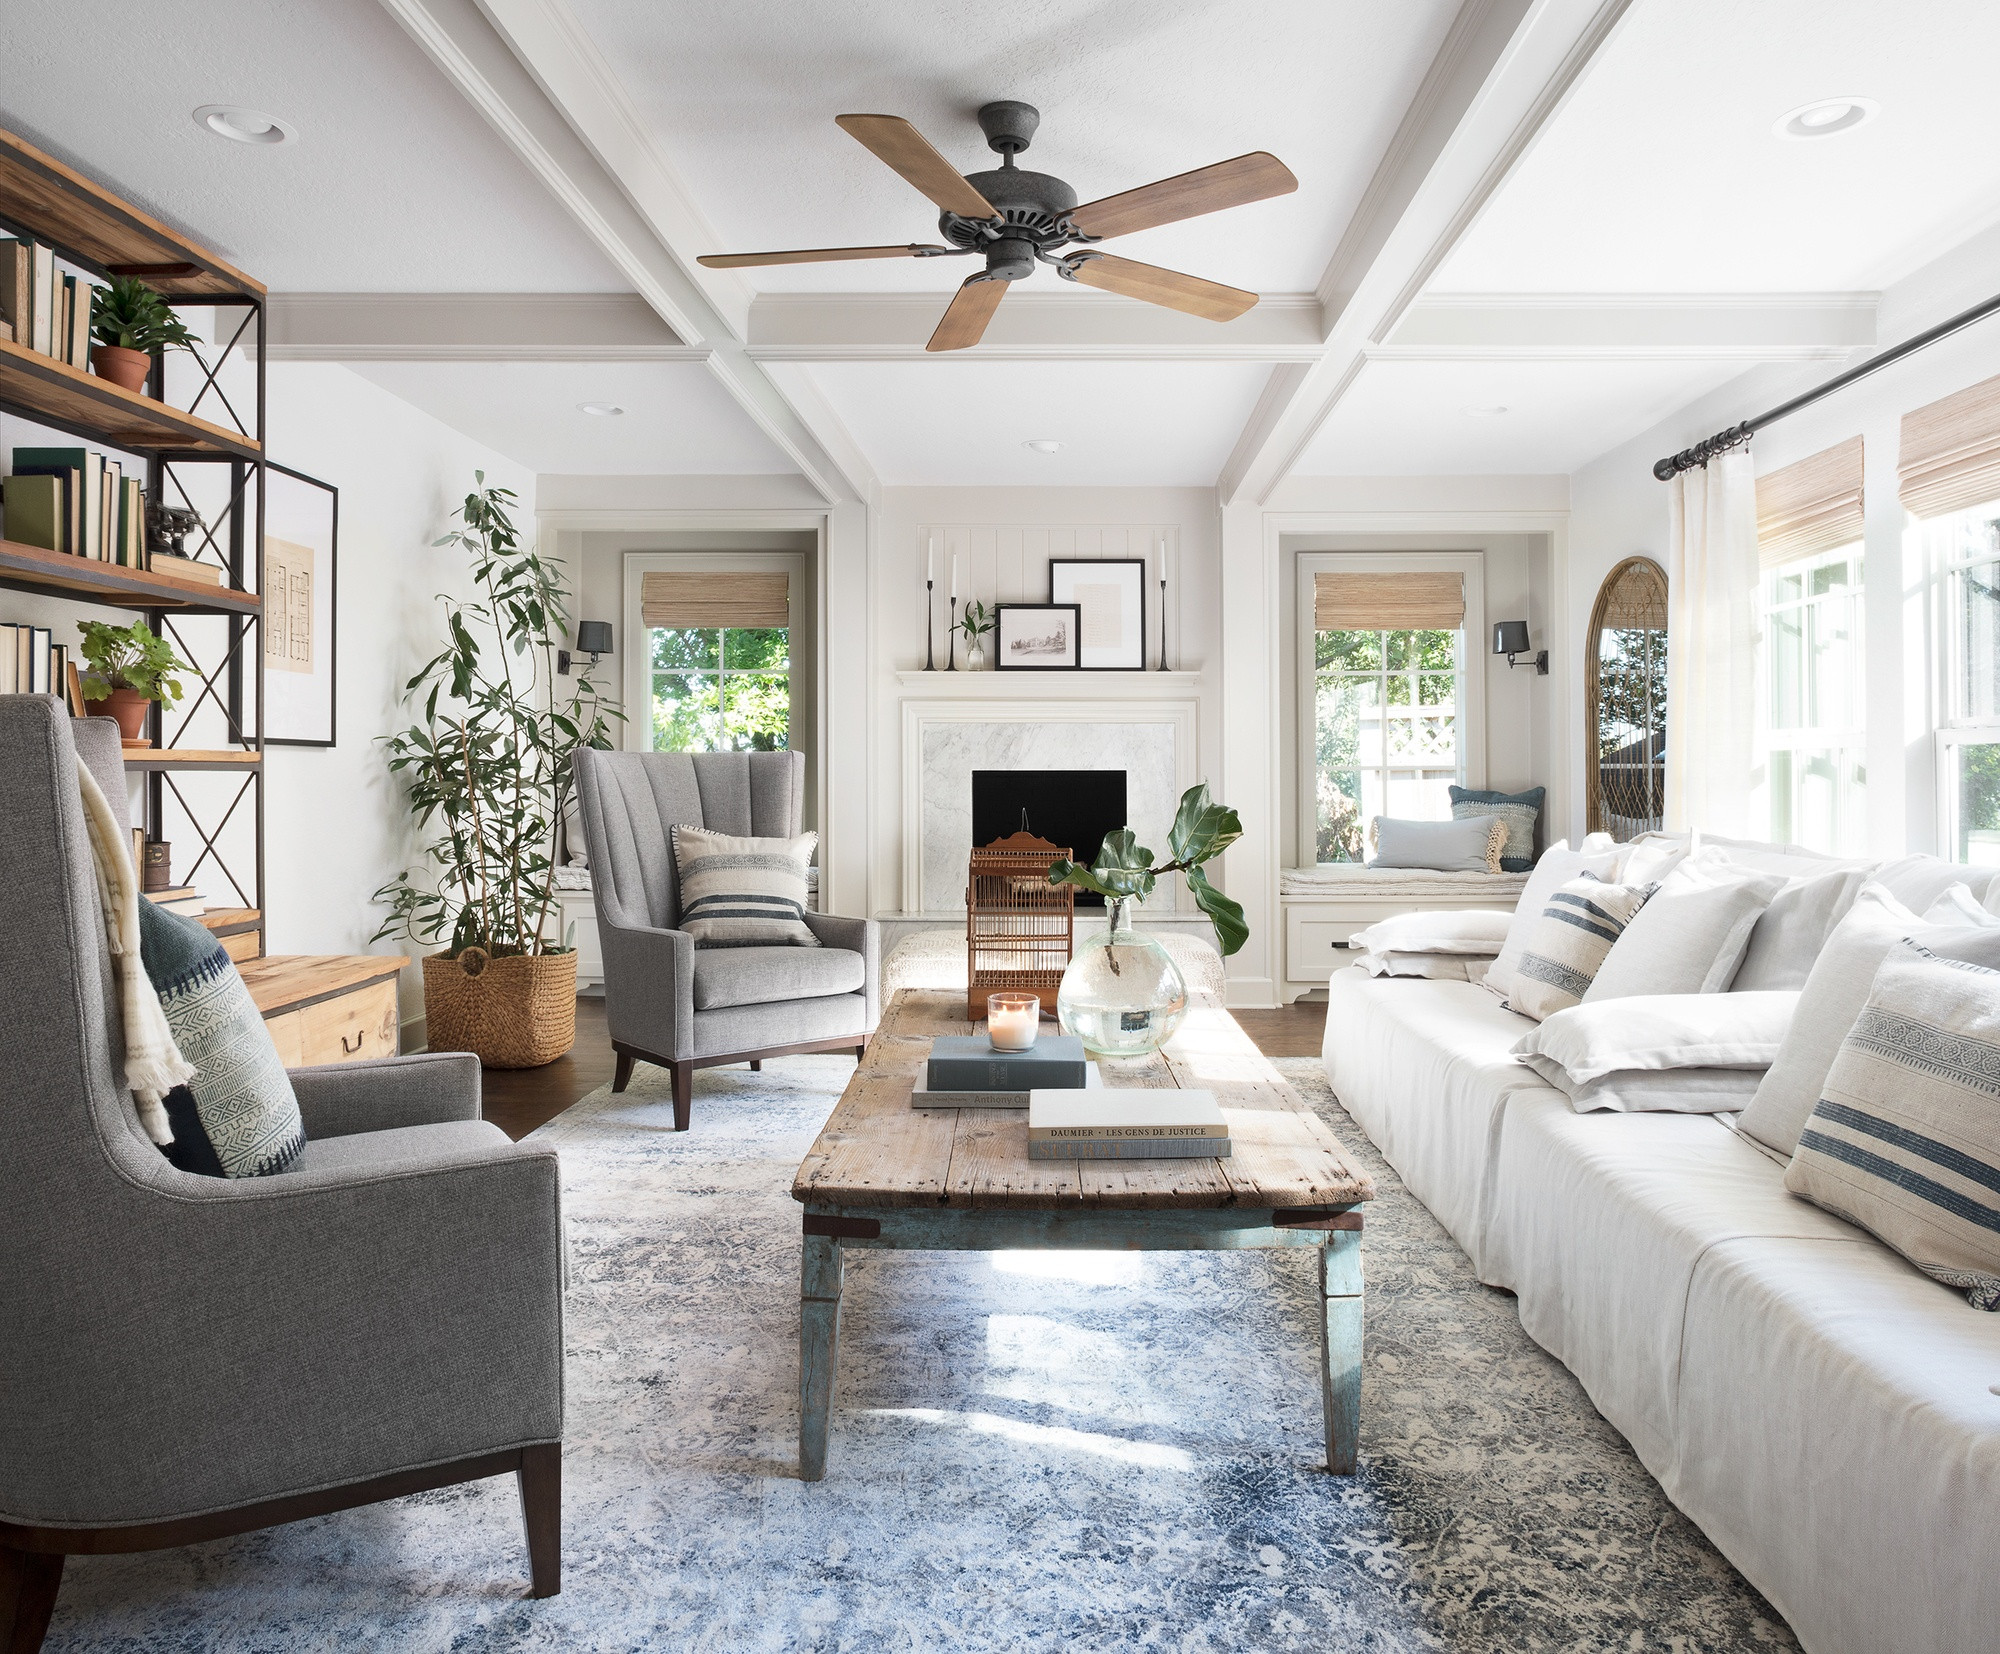 Images Of Joanna Gaines Living Room Designs